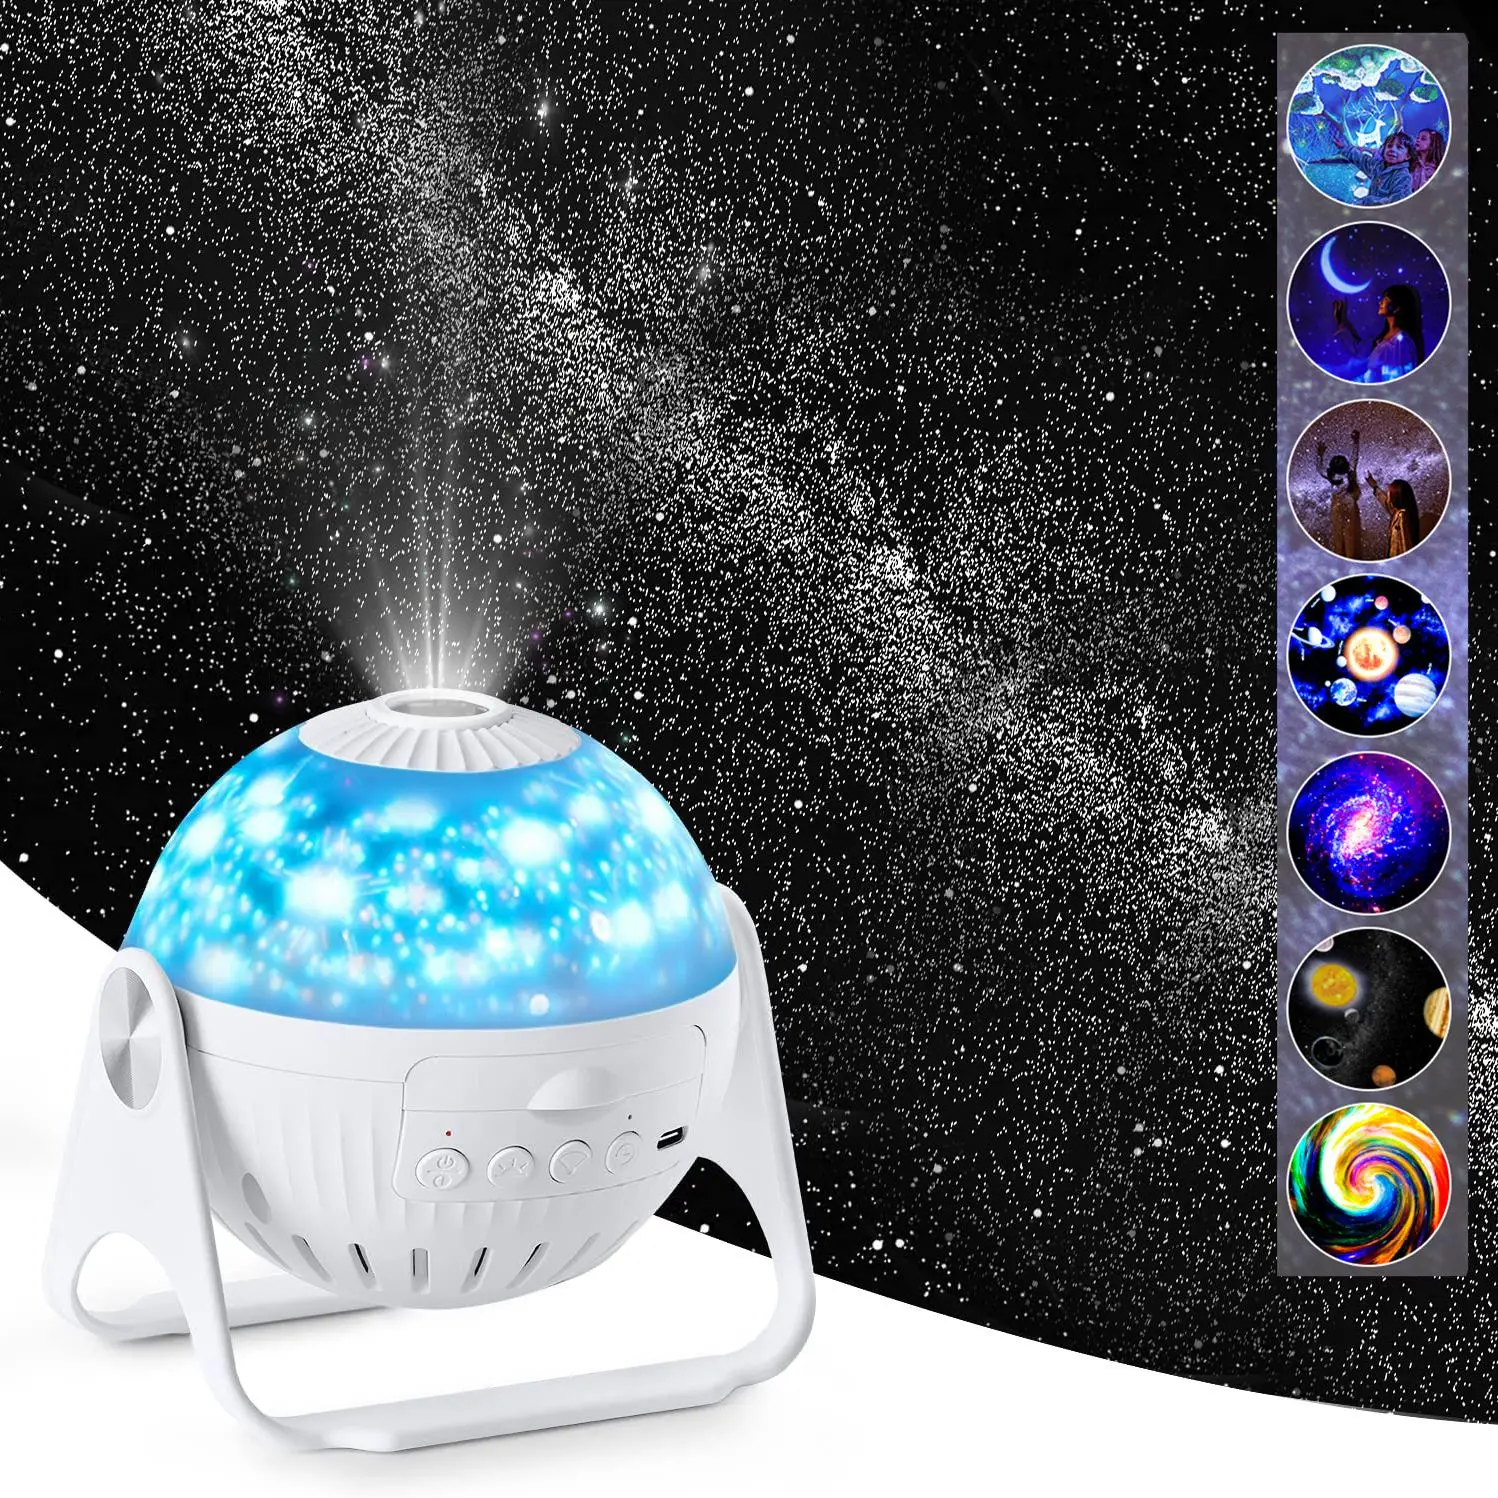 Led 7 in 1 Star Galaxy Projector Night Lights Rotate Planetarium Starry SkyLamp For Kids  Gifts Home Room Decorative Nightlights